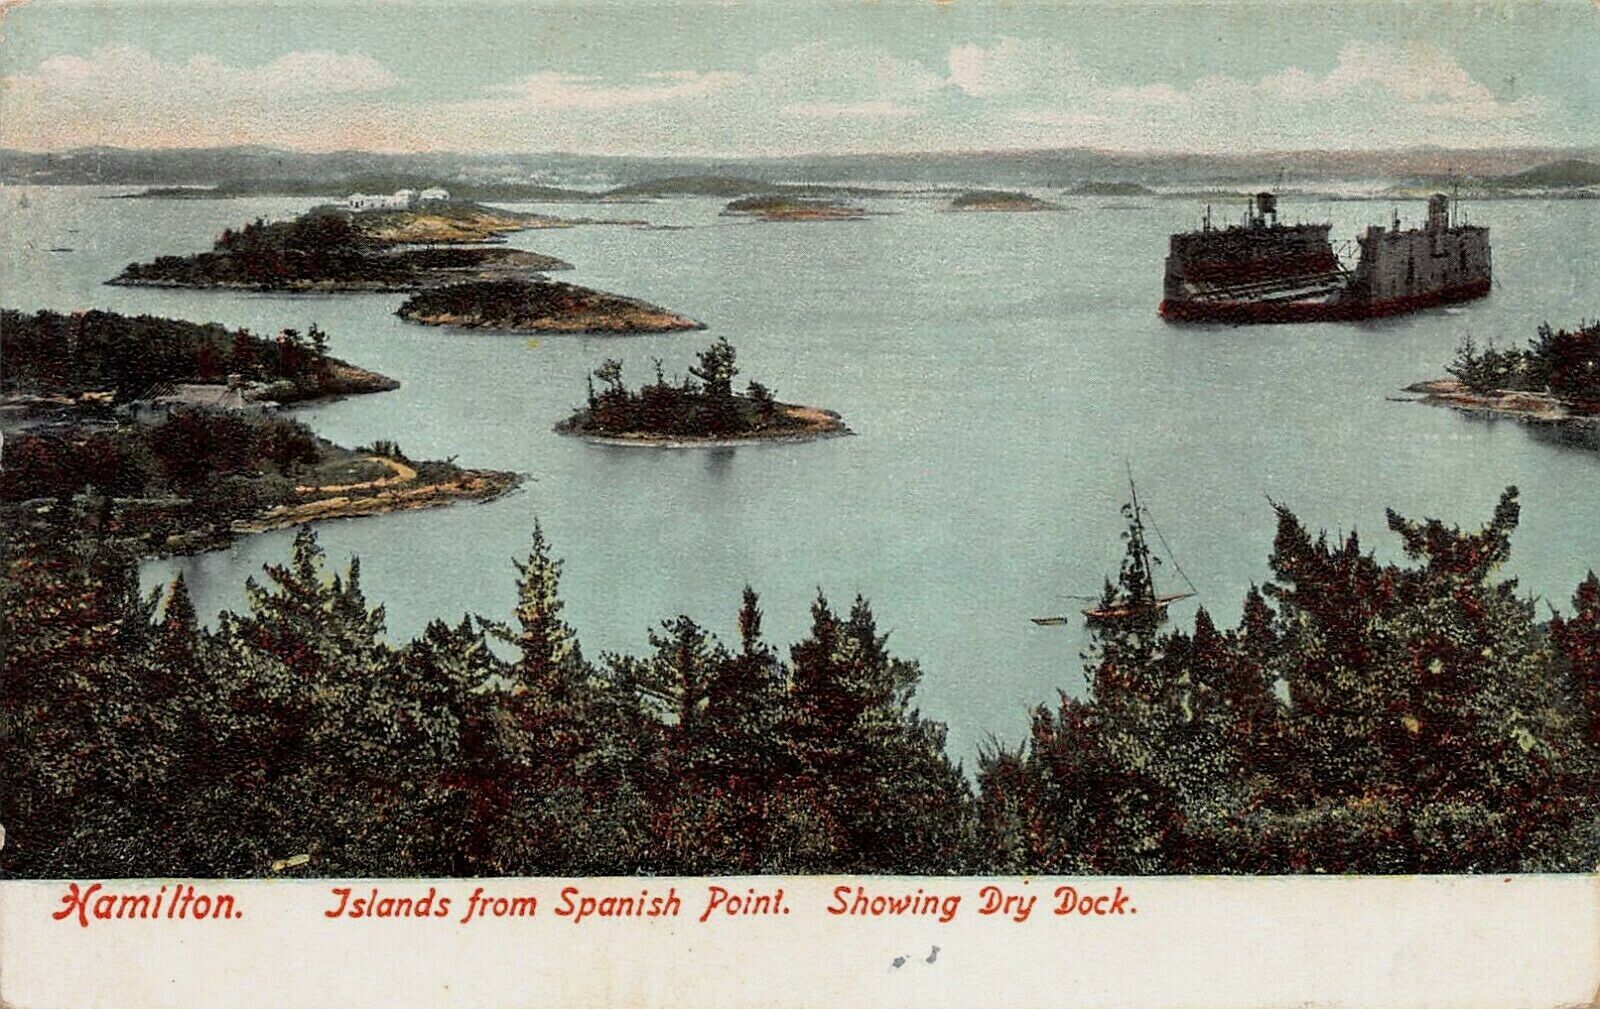 View of Islands from Spanish Point, Hamilton, Bermuda, 1907 Postcard, Used